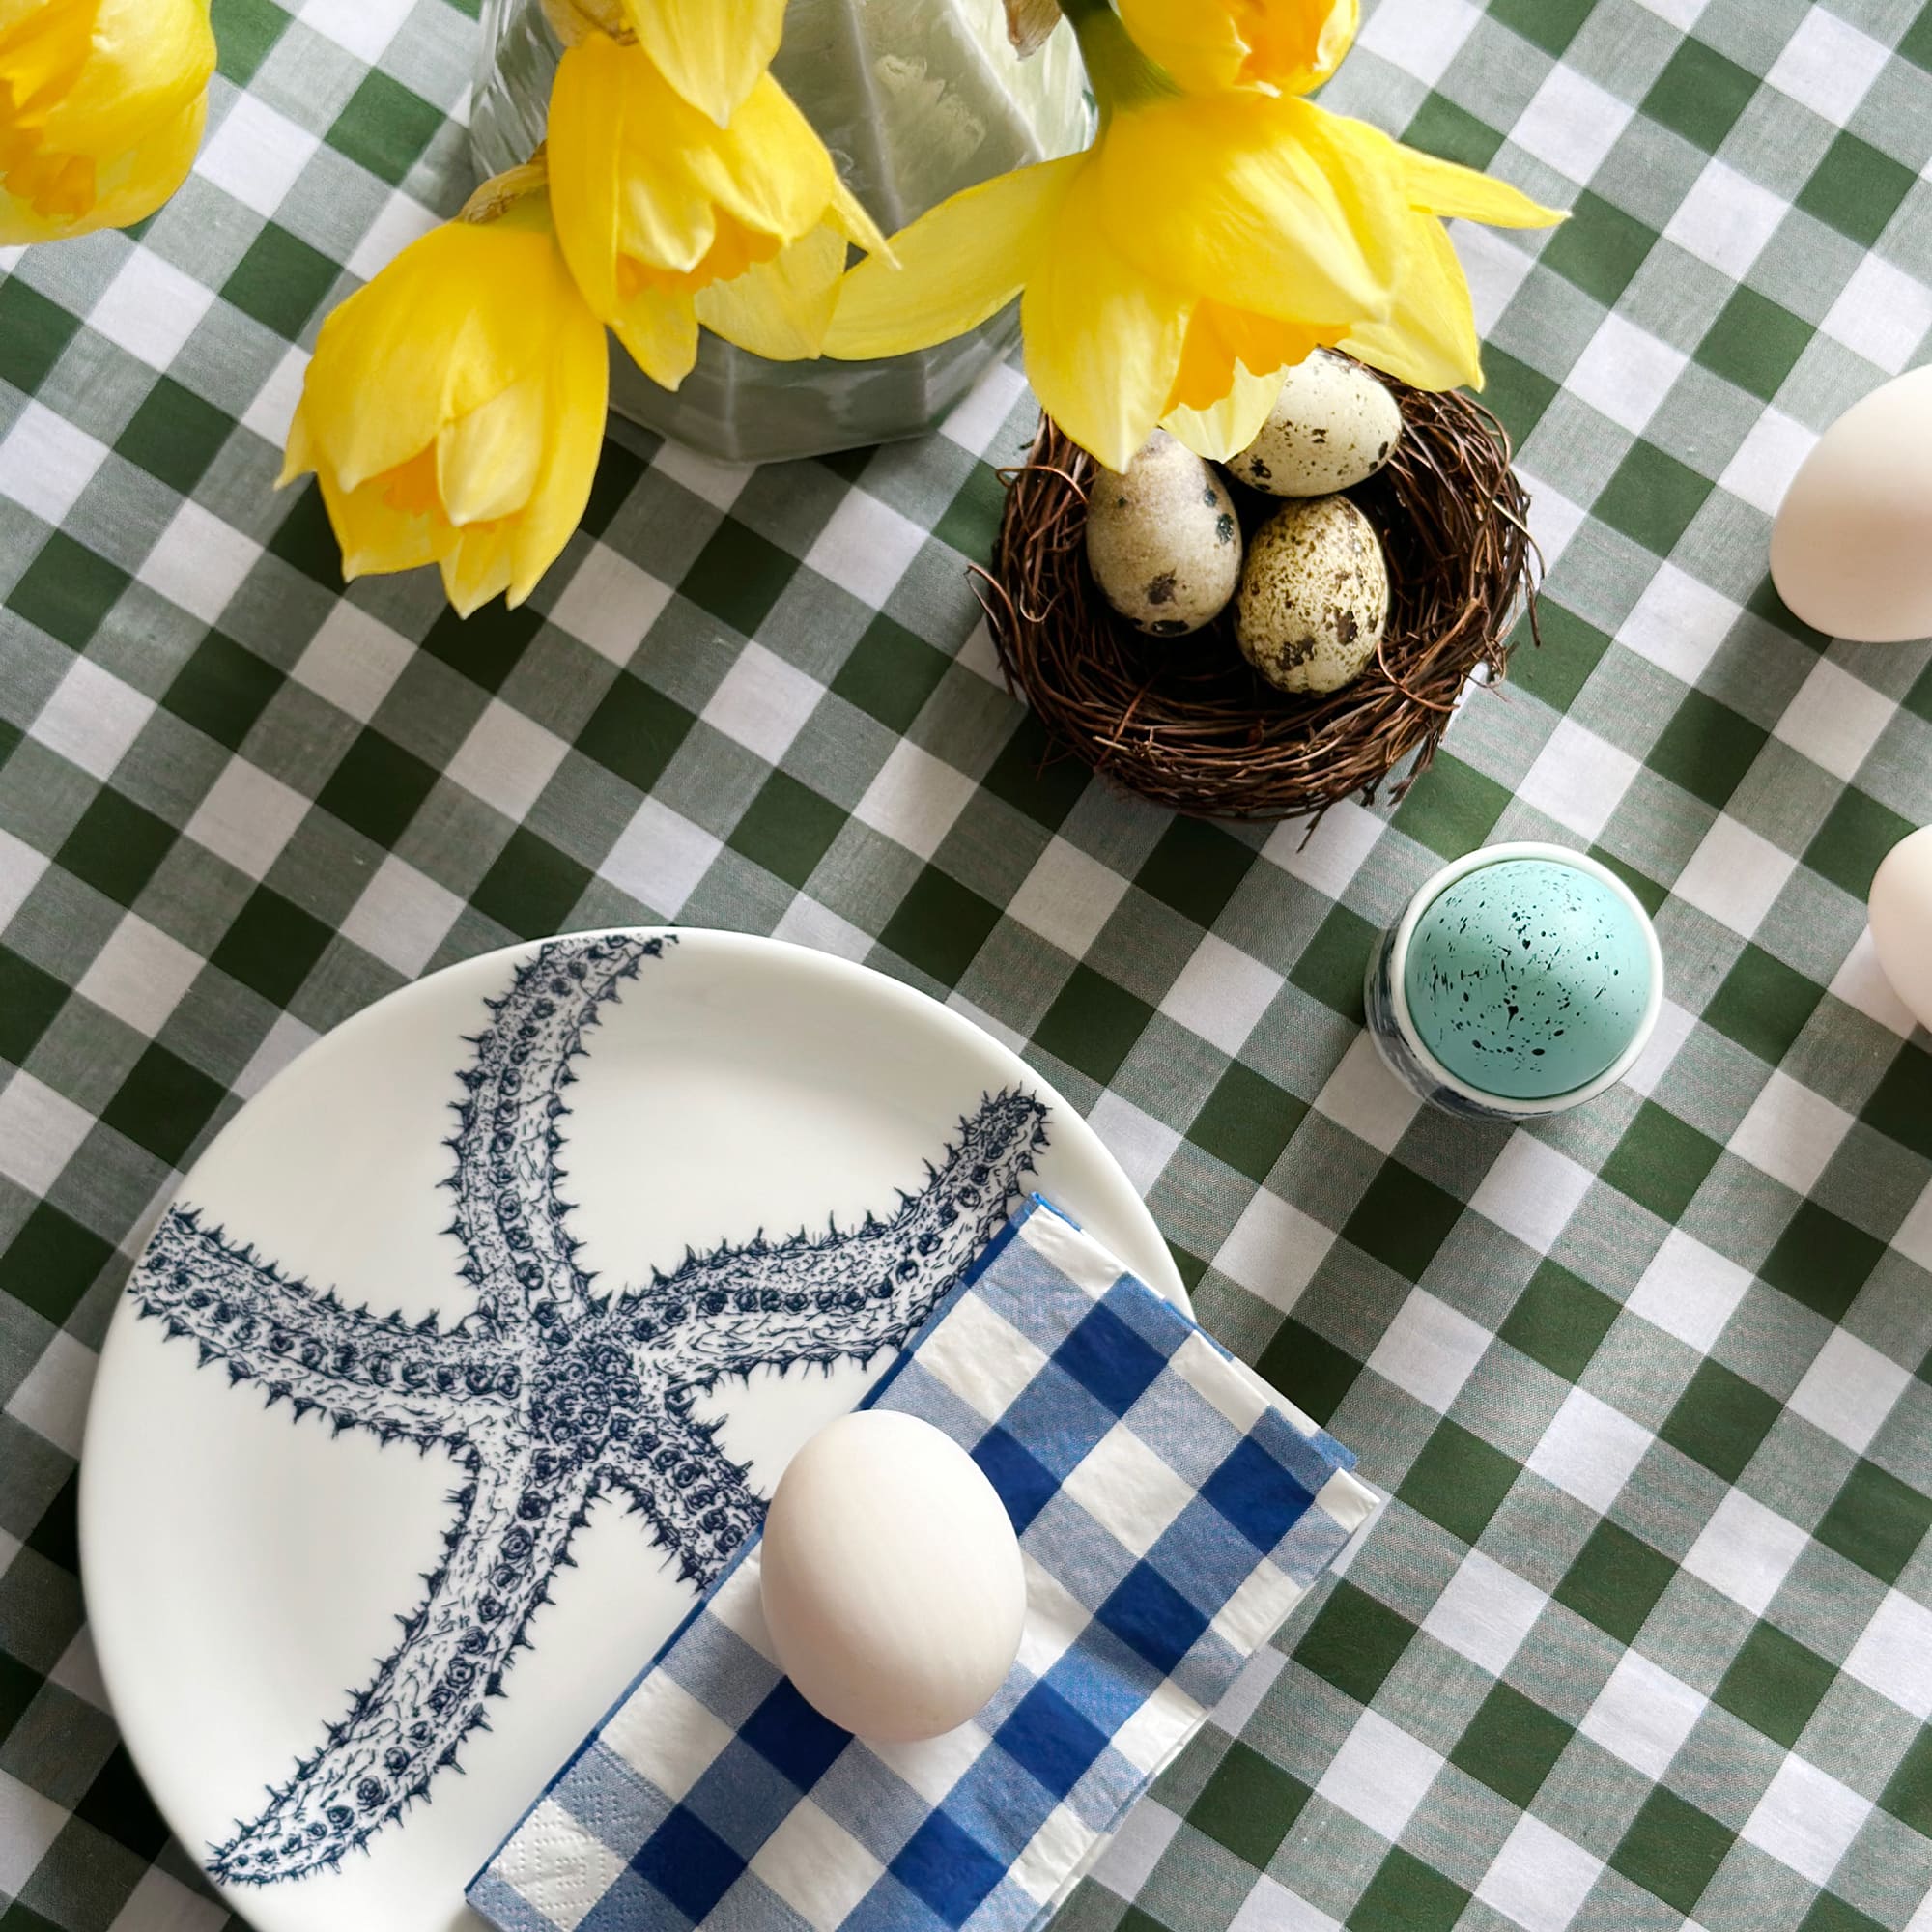 White bone china pate with navy illustrated starfish on. The plate is on a green gingham tablecloth with eggs and daffodils set for Easter.